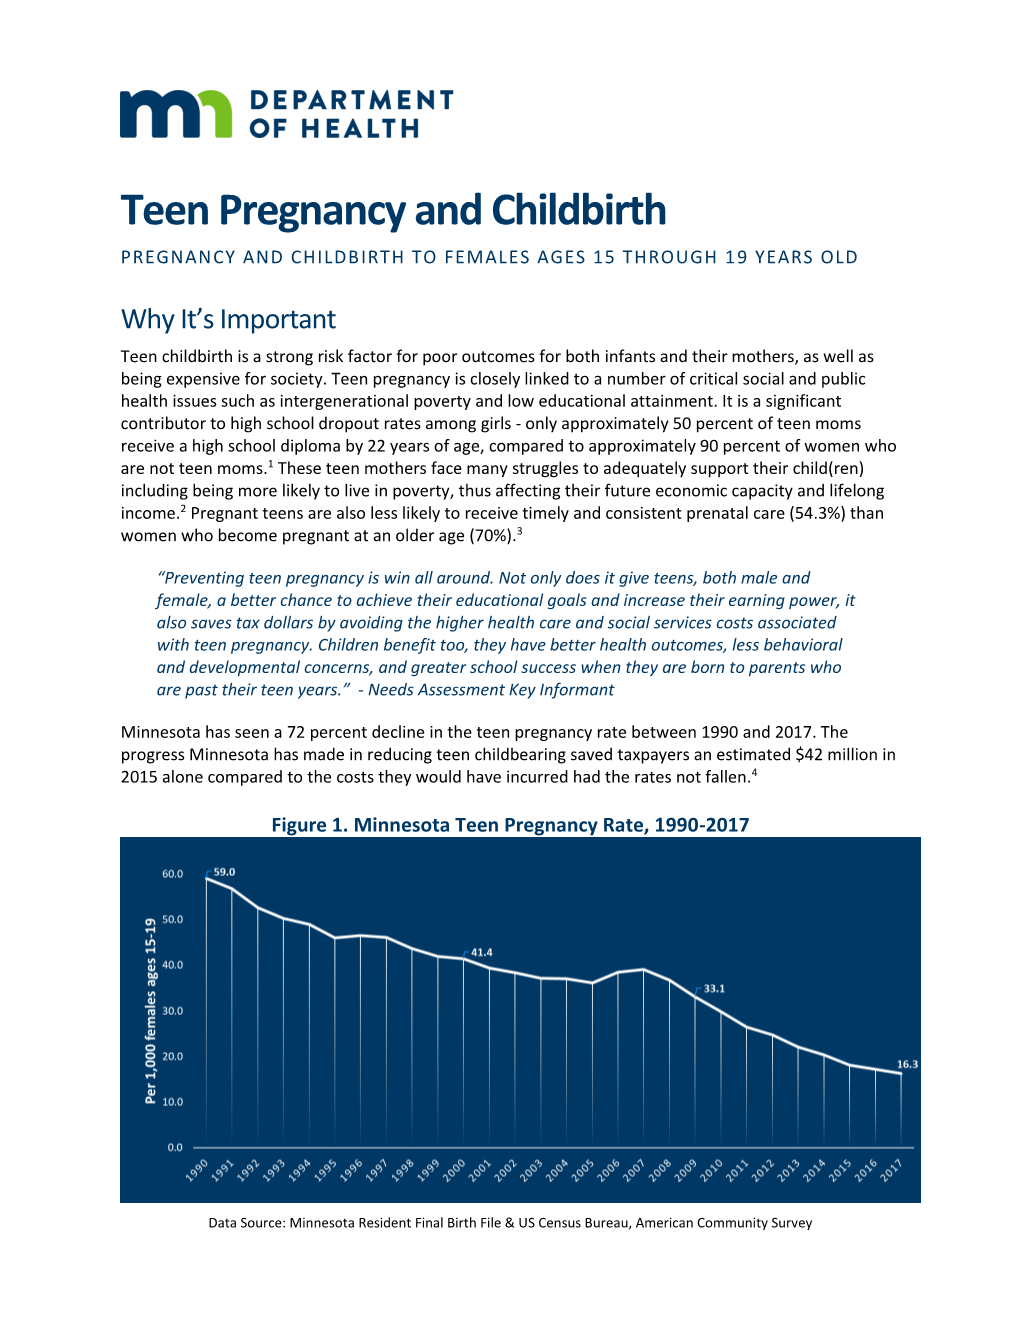 Teen Pregnancy and Childbirth PREGNANCY and CHILDBIRTH to FEMALES AGES 15 THROUGH 19 YEARS OLD